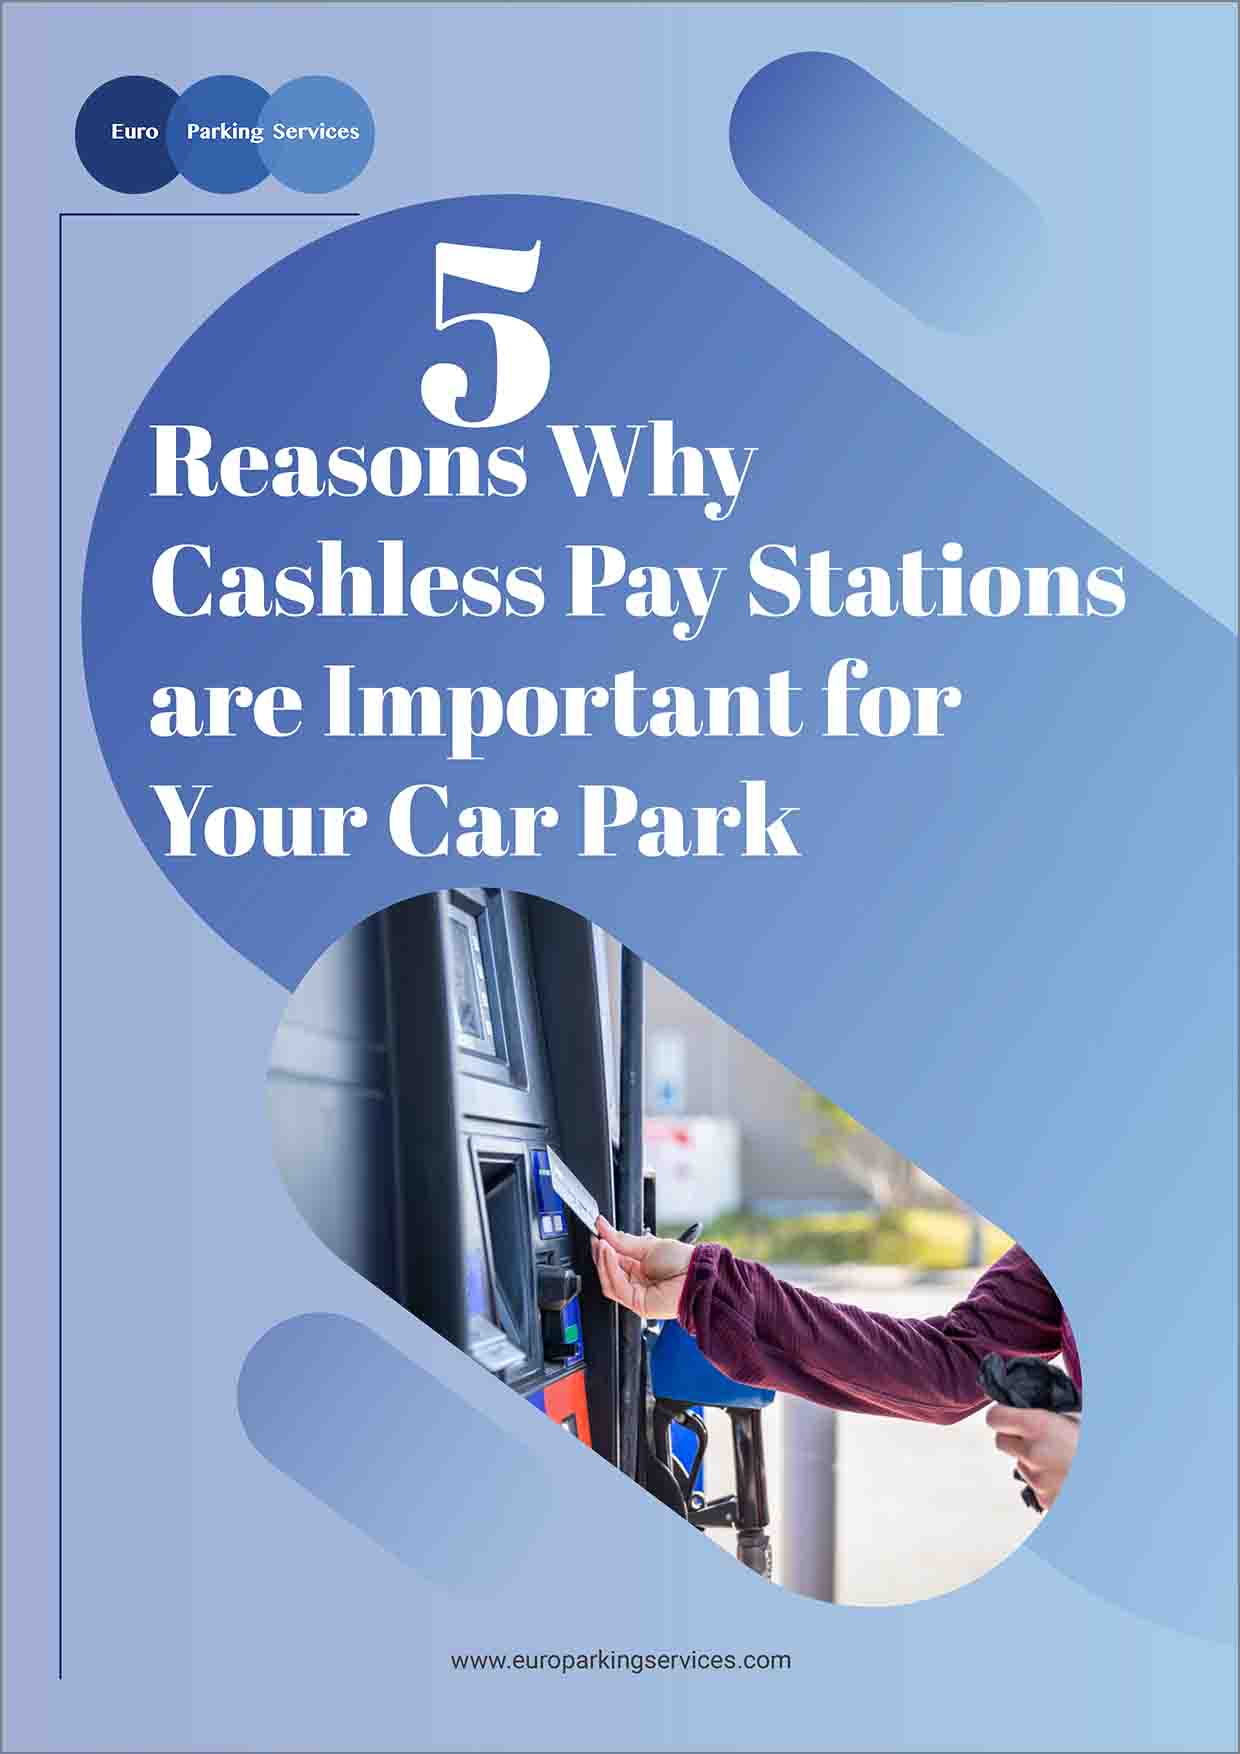 5 Reasons Why Cashless Pay Stations are Important for Your Car Park